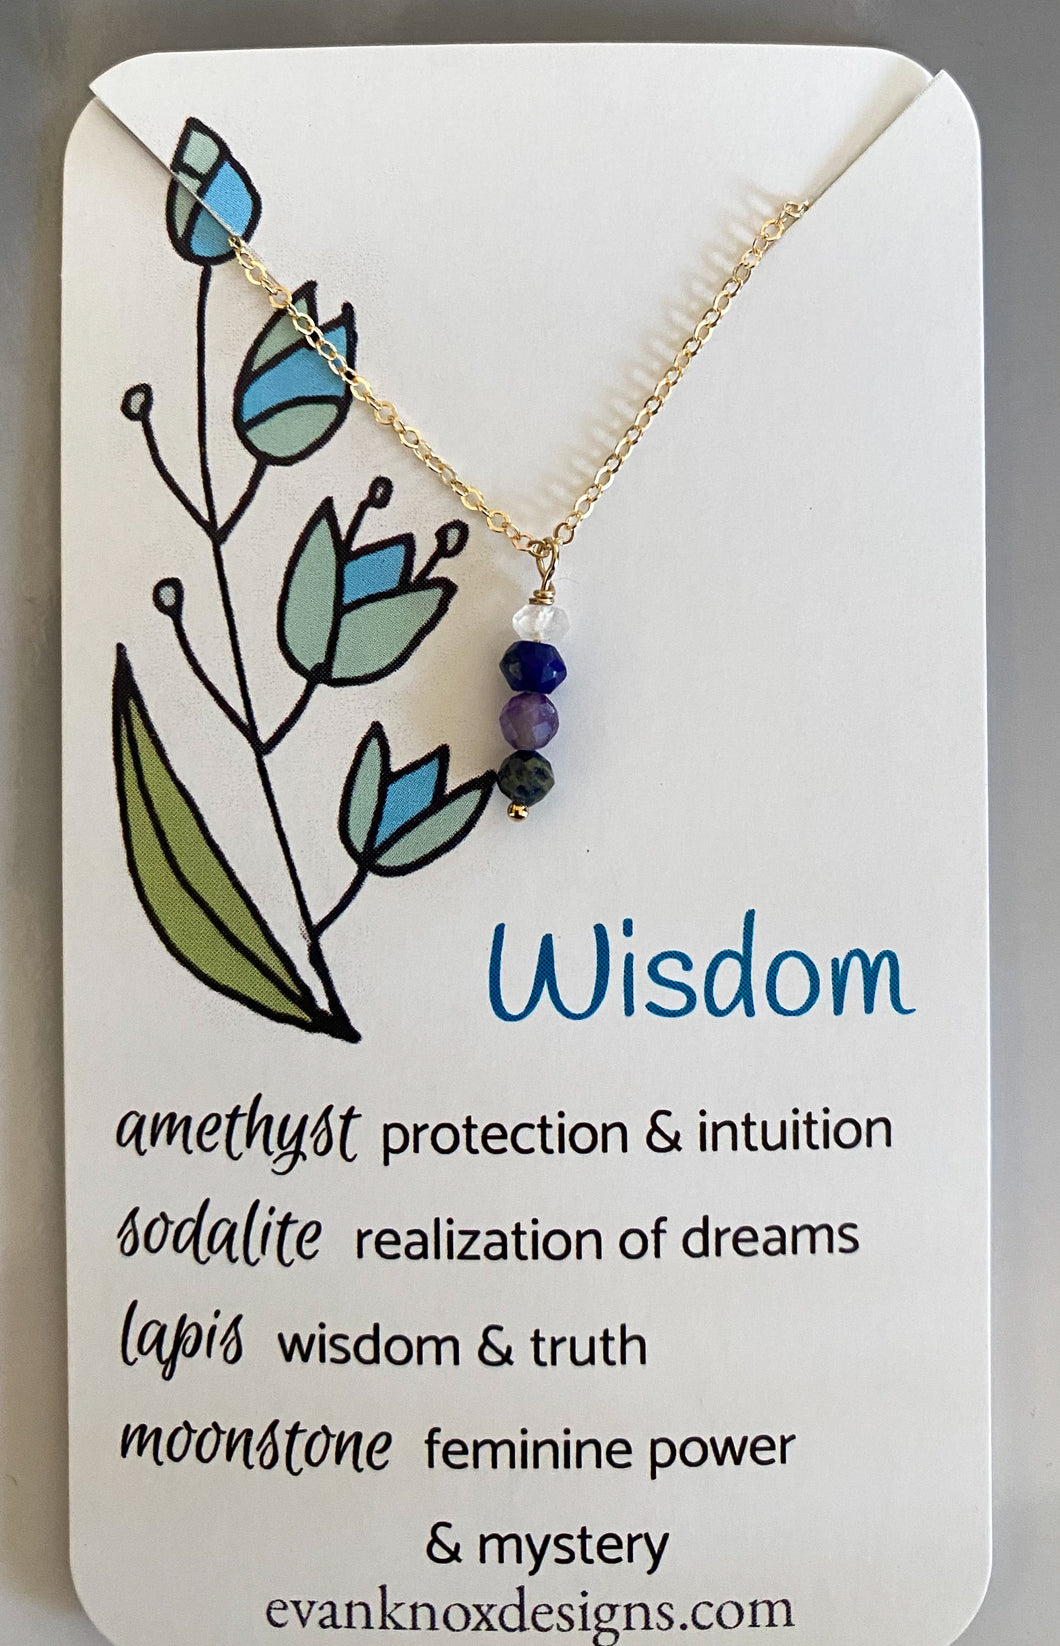 Wisdom necklace in gold